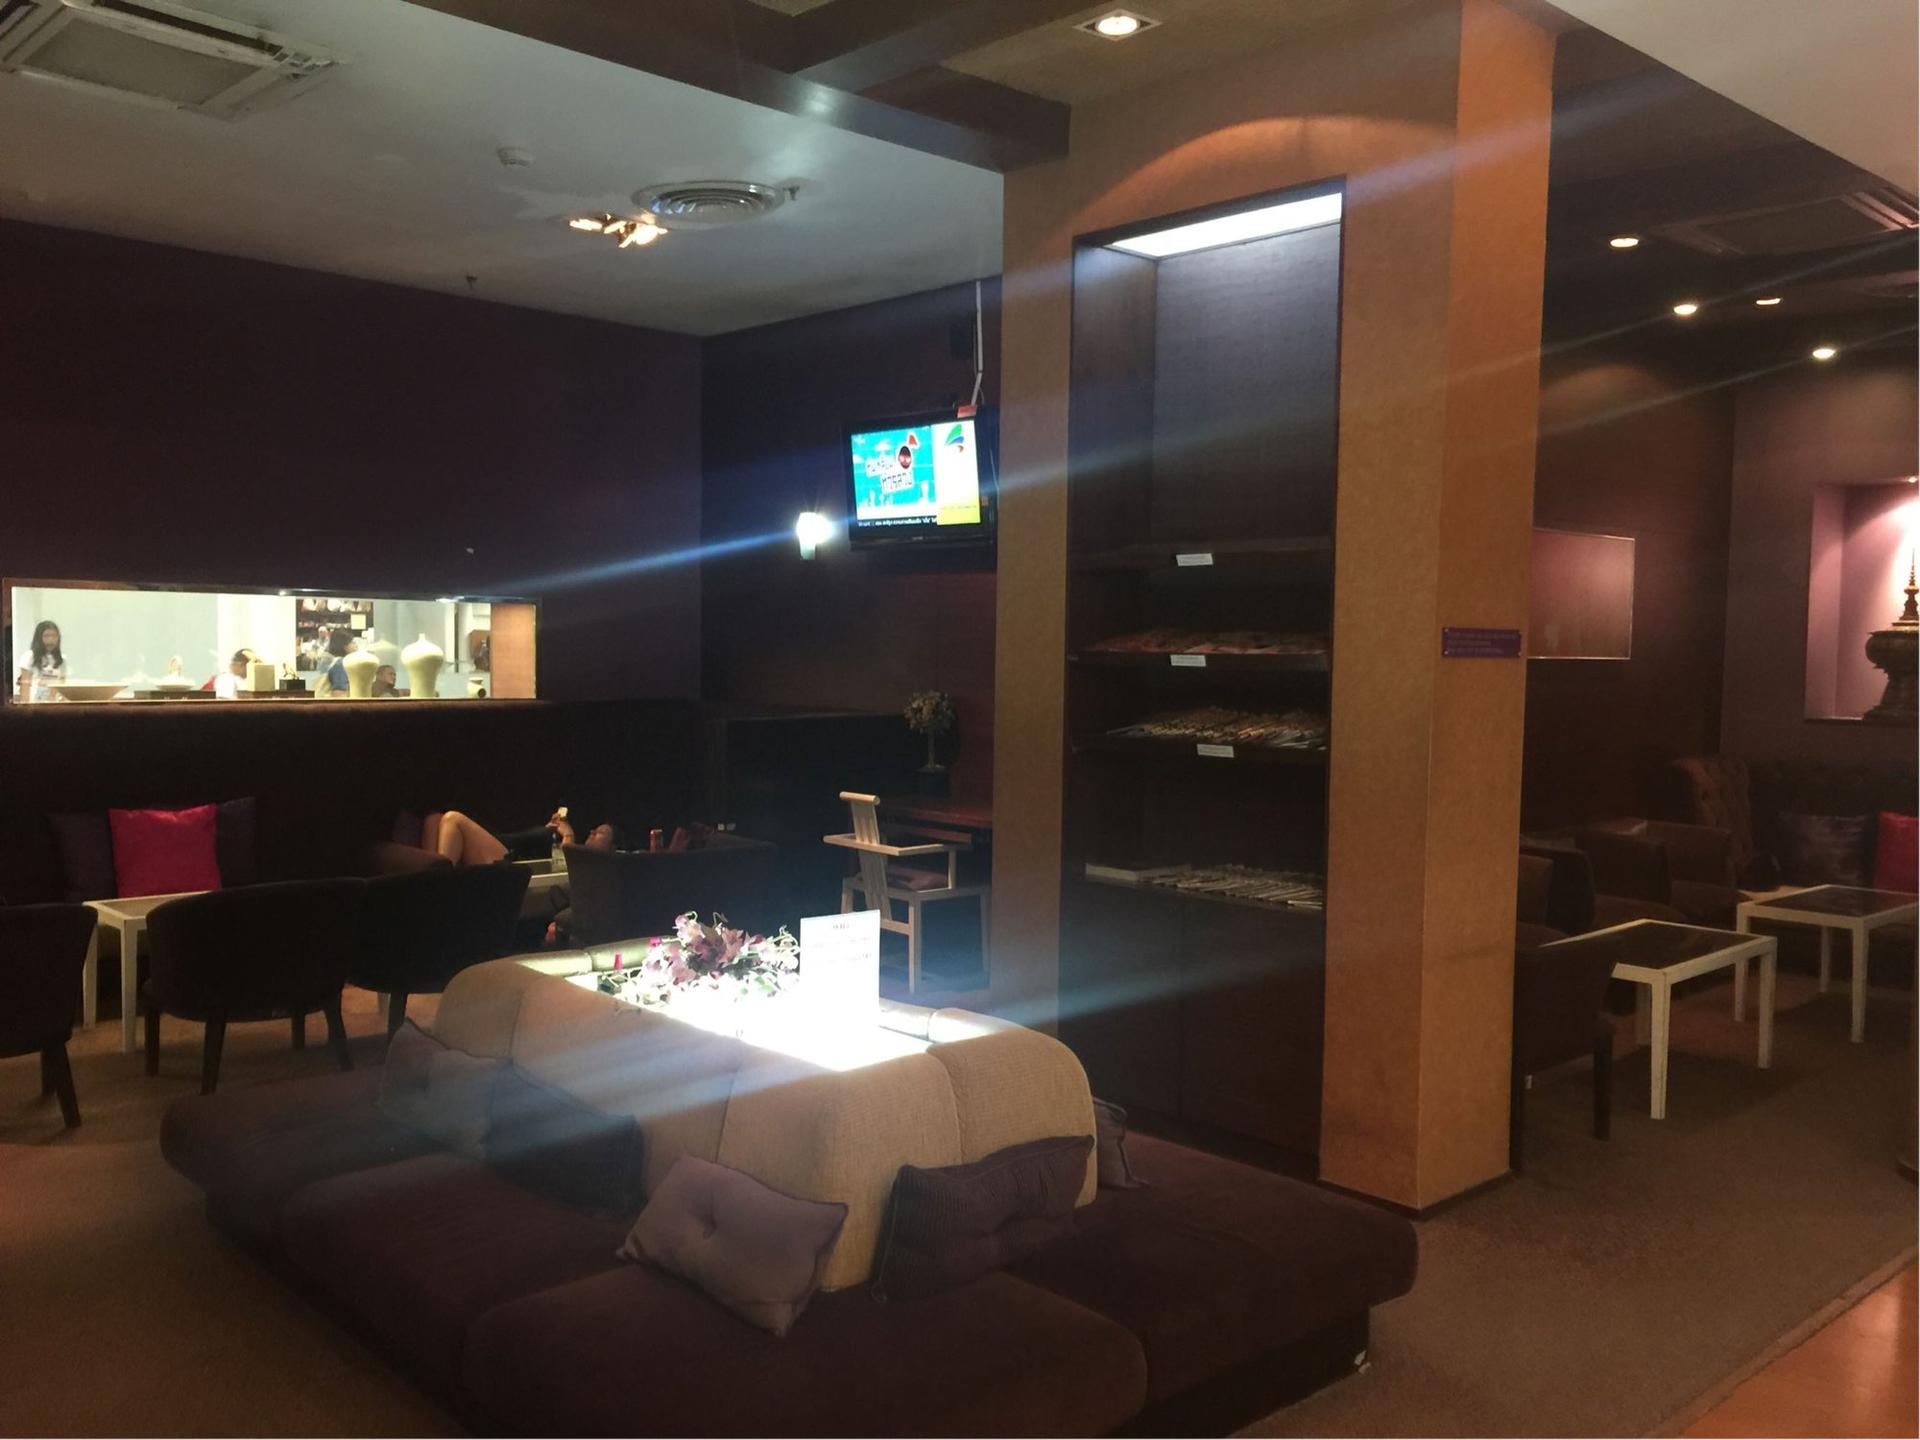 Thai Airways Royal Orchid Lounge image 2 of 22